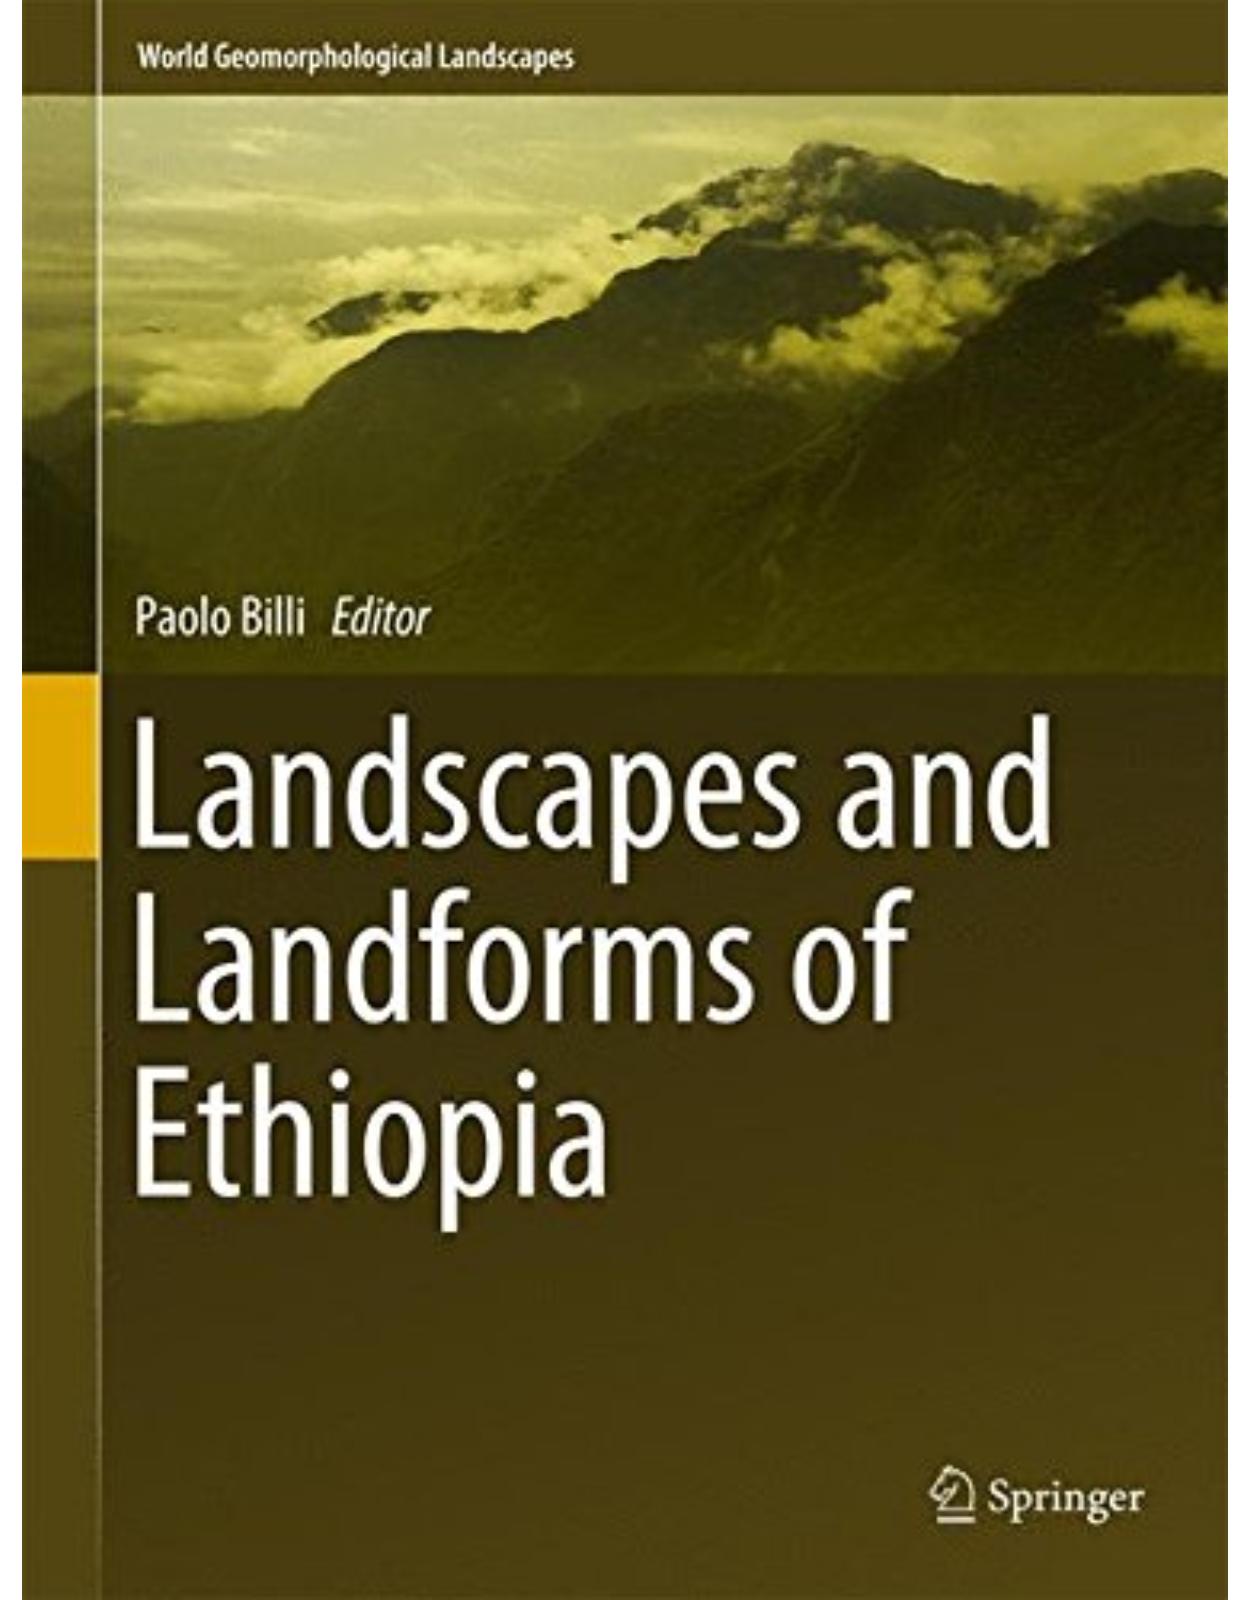 Landscapes and Landforms of Ethiopia